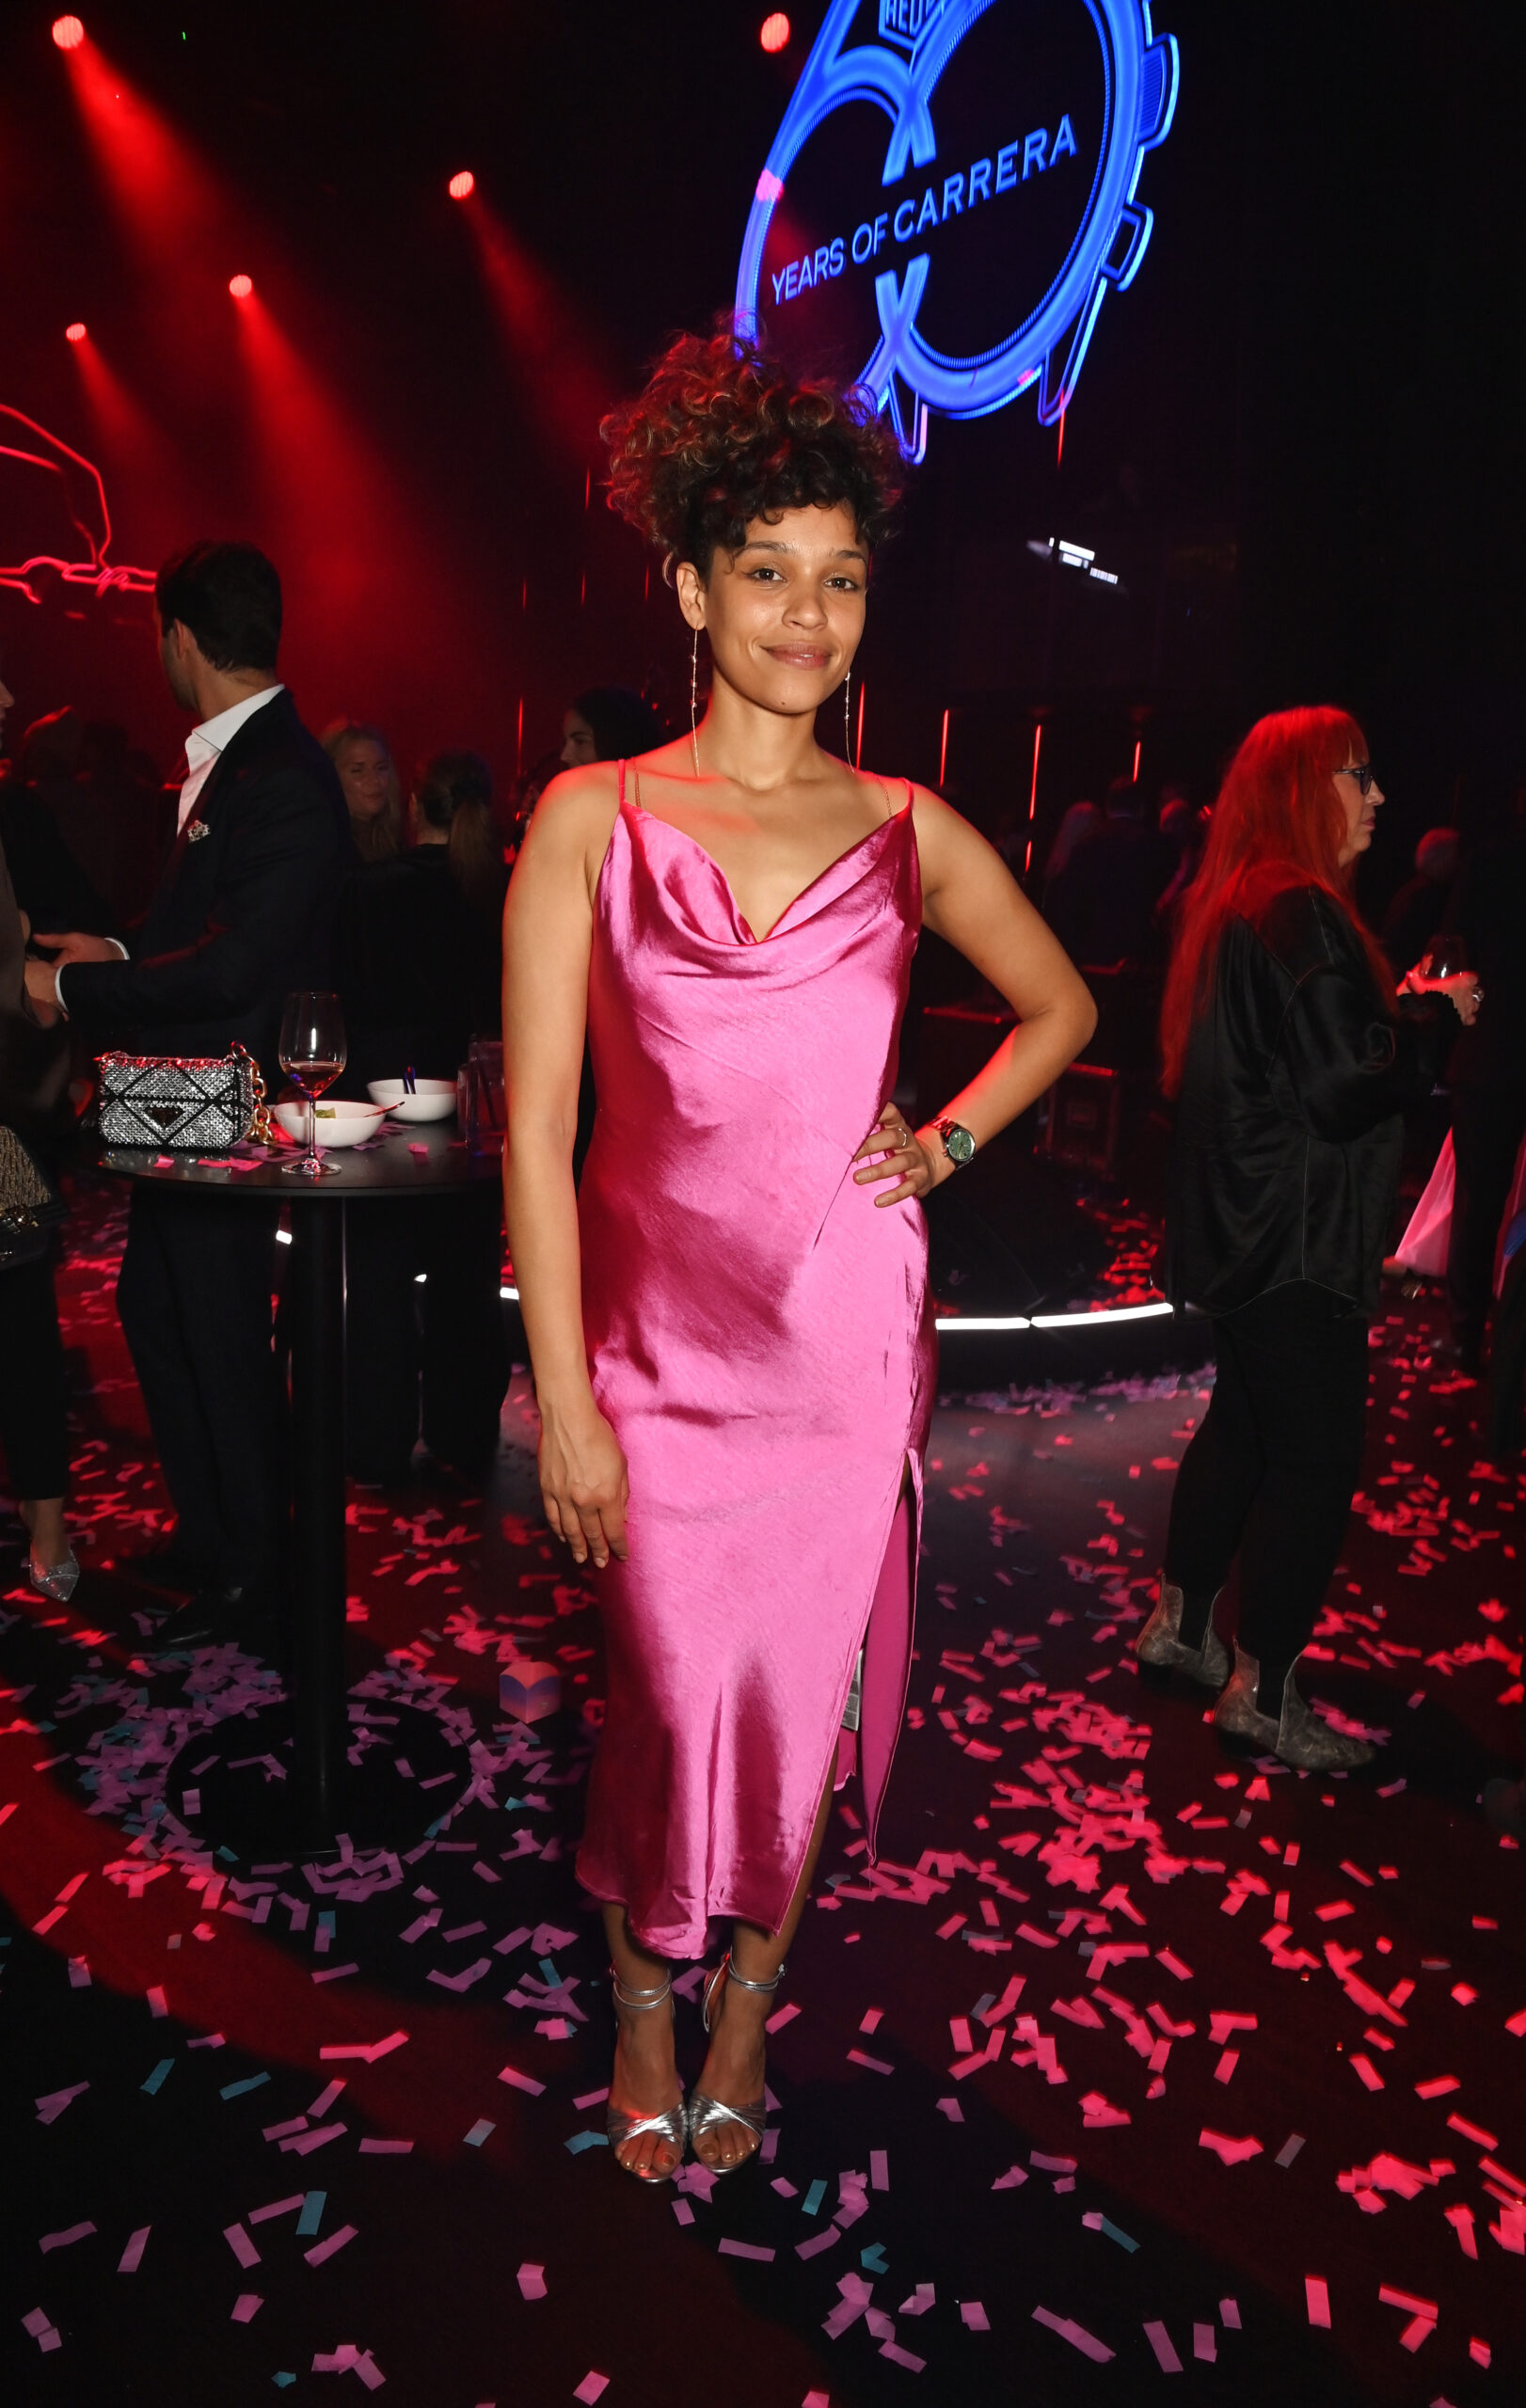 Izzy bizu at the tag heuer carrera 60th anniversary014 scaled